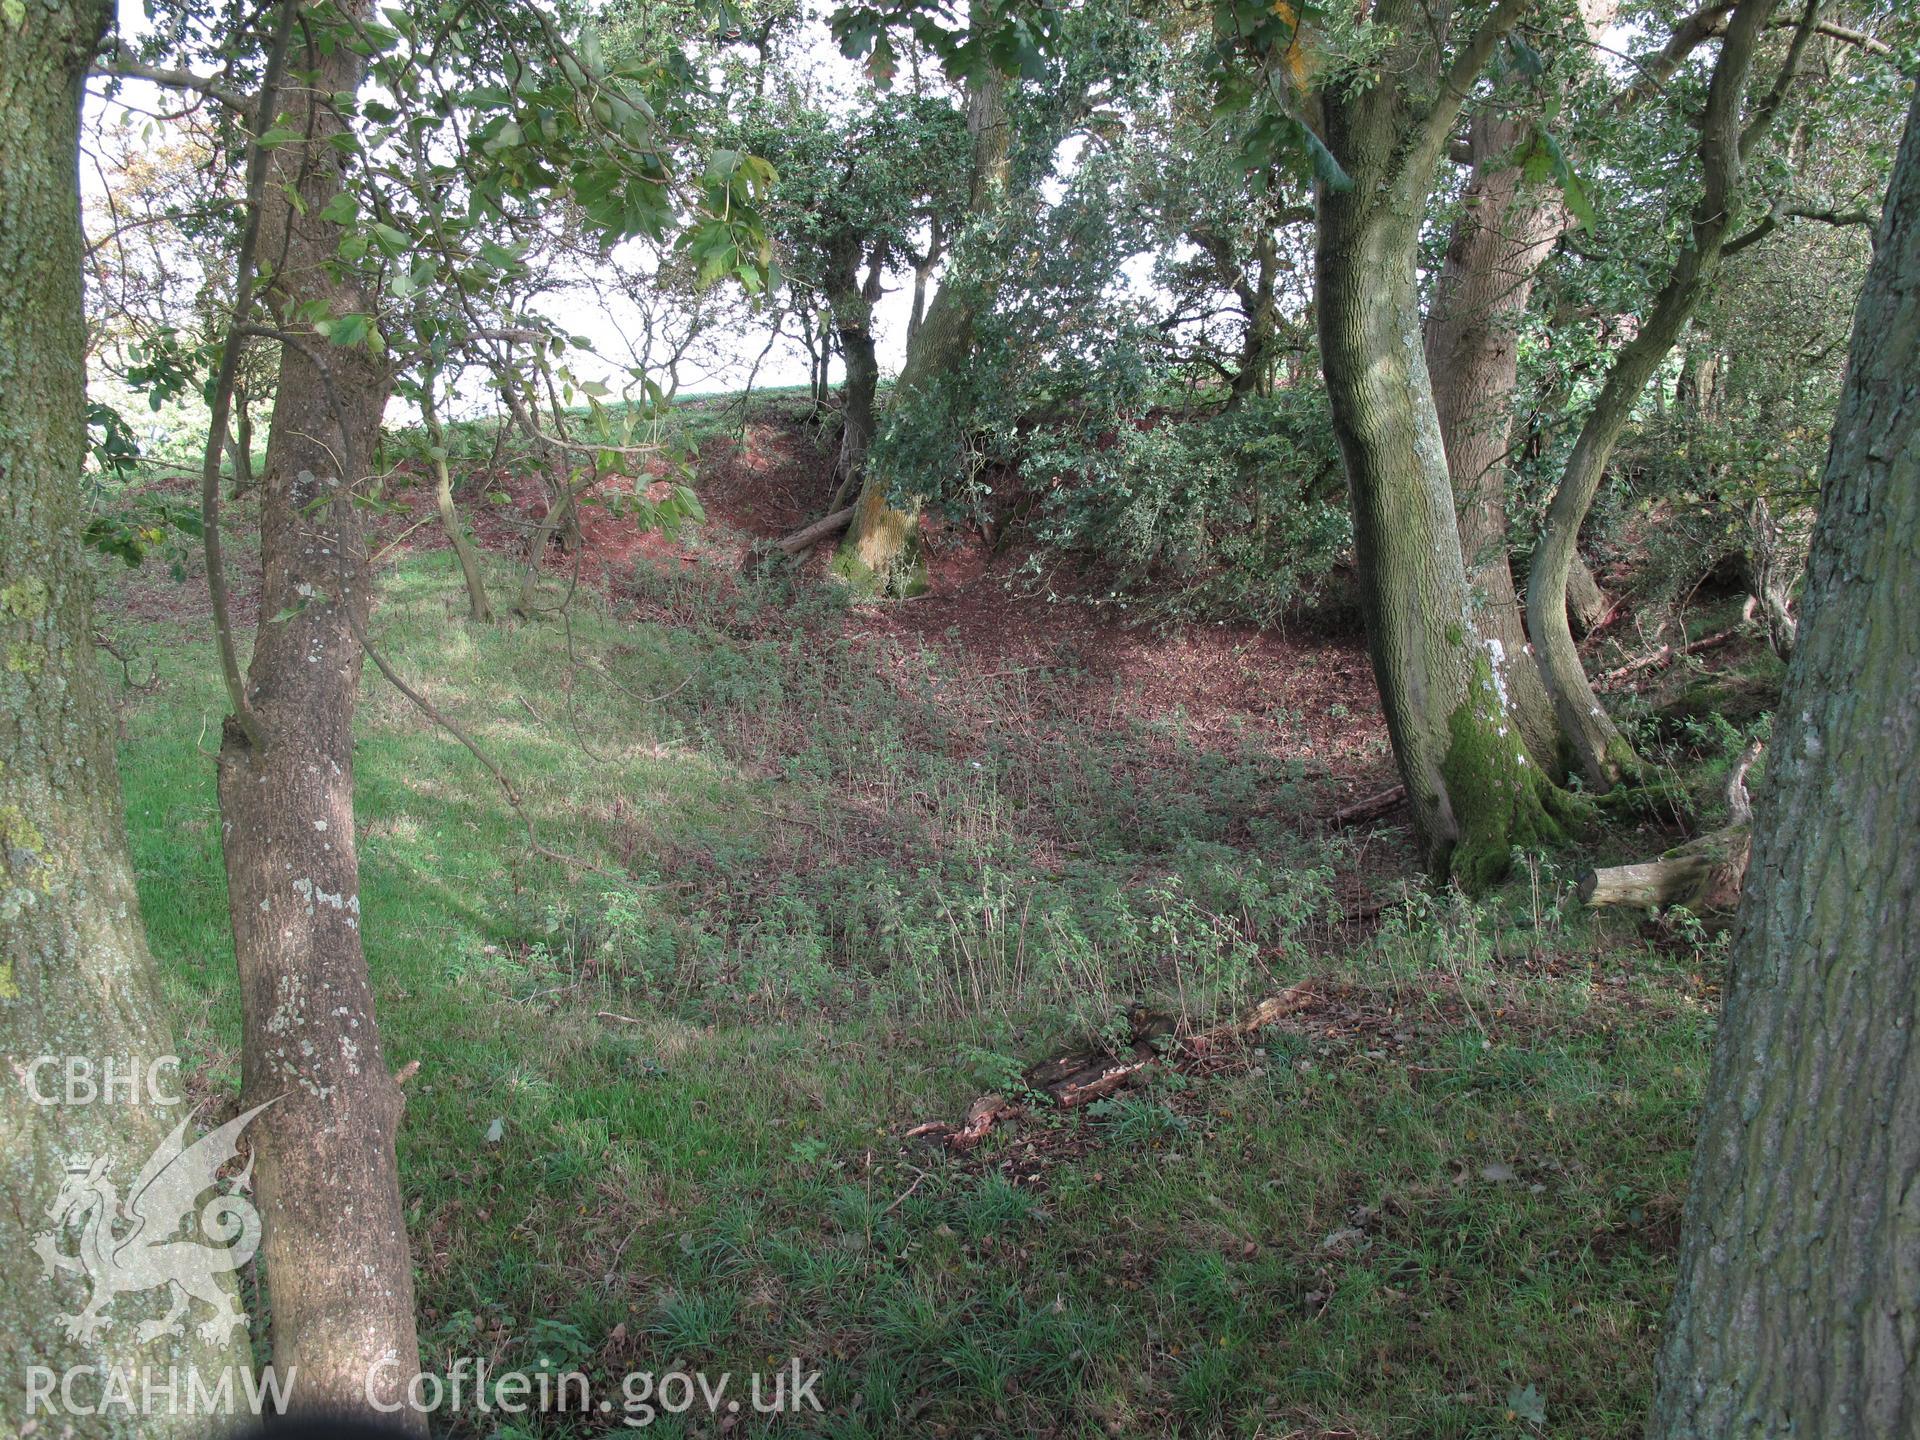 Quarry hollow at Craig-y-dorth from the north, taken by Brian Malaws on 26 September 2011.